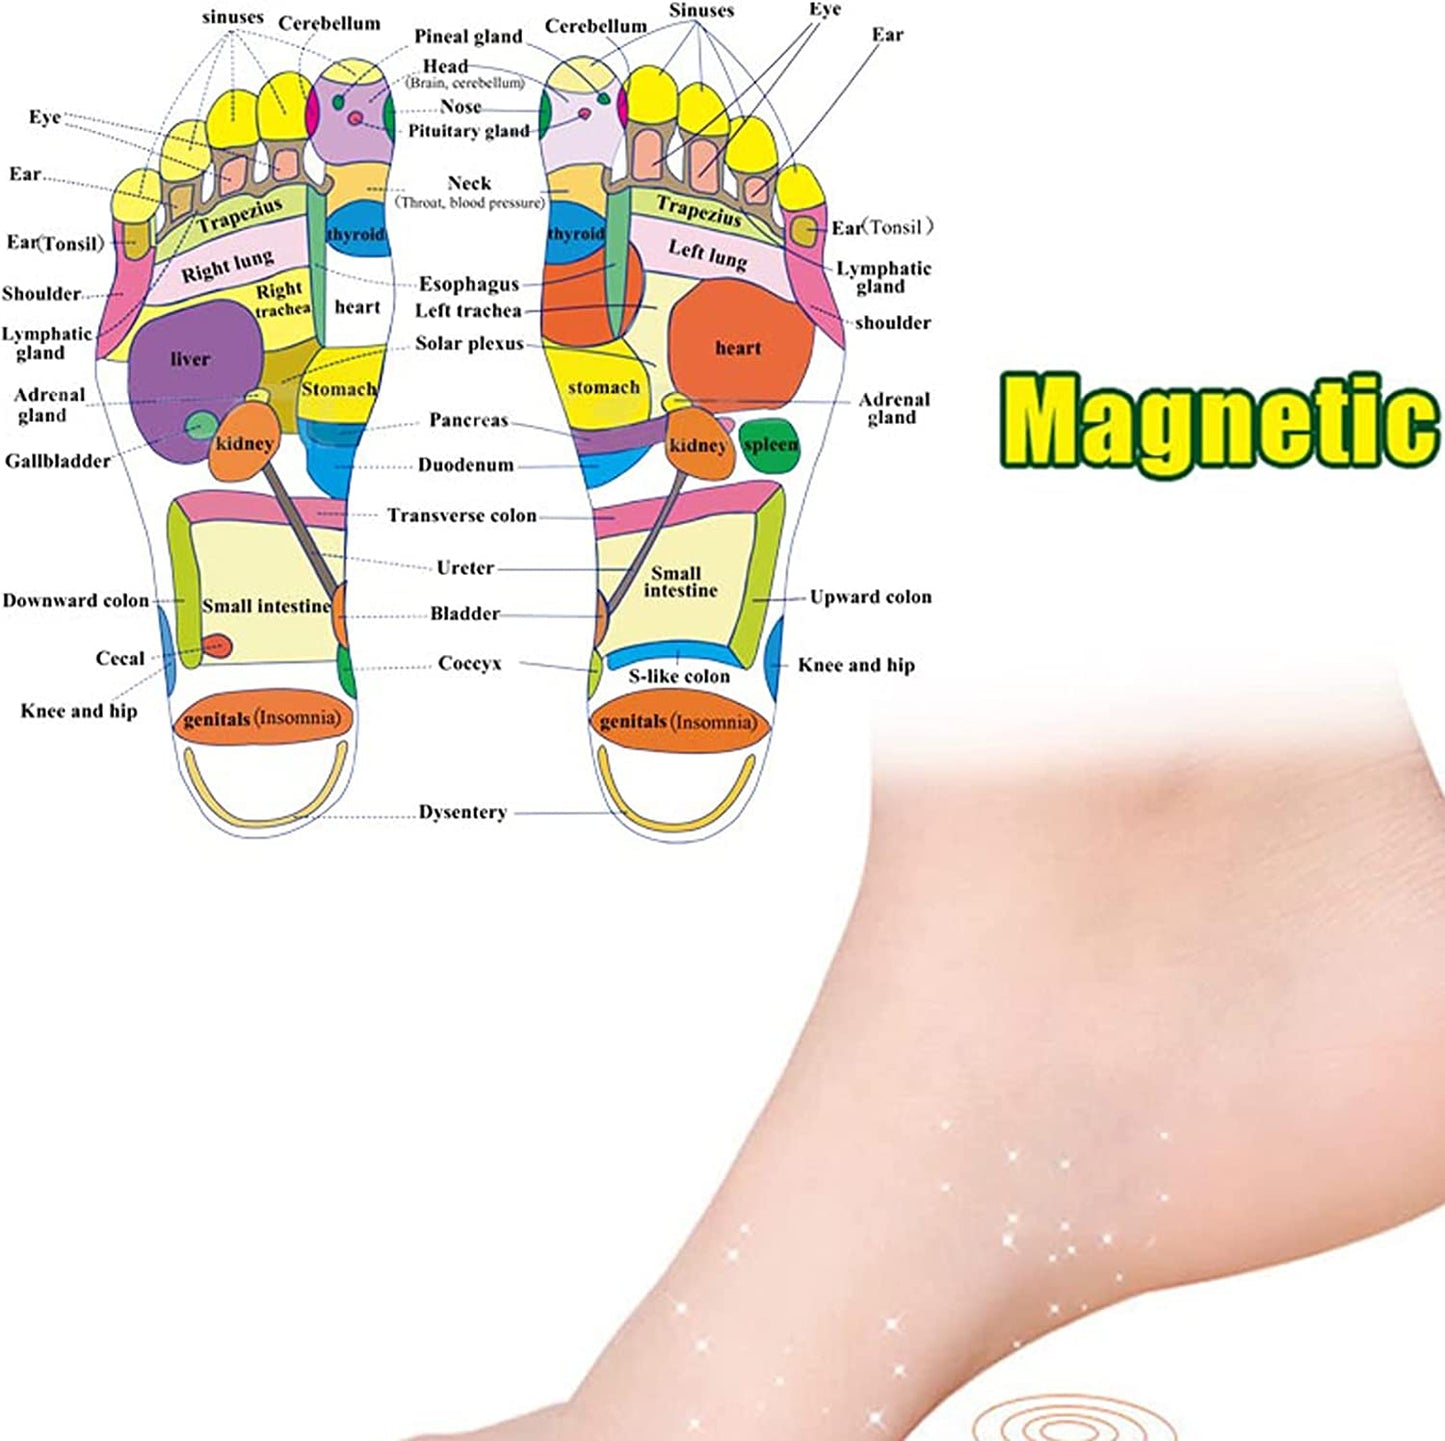 3 Pairs Acupressure Magnetic Massage Insoles, Oumers Foot Massage Shoe-Pad Foot Therapy Reflexology Pain Relief Shoe Insoles,Transparent (US M:7-9 W:8-10)